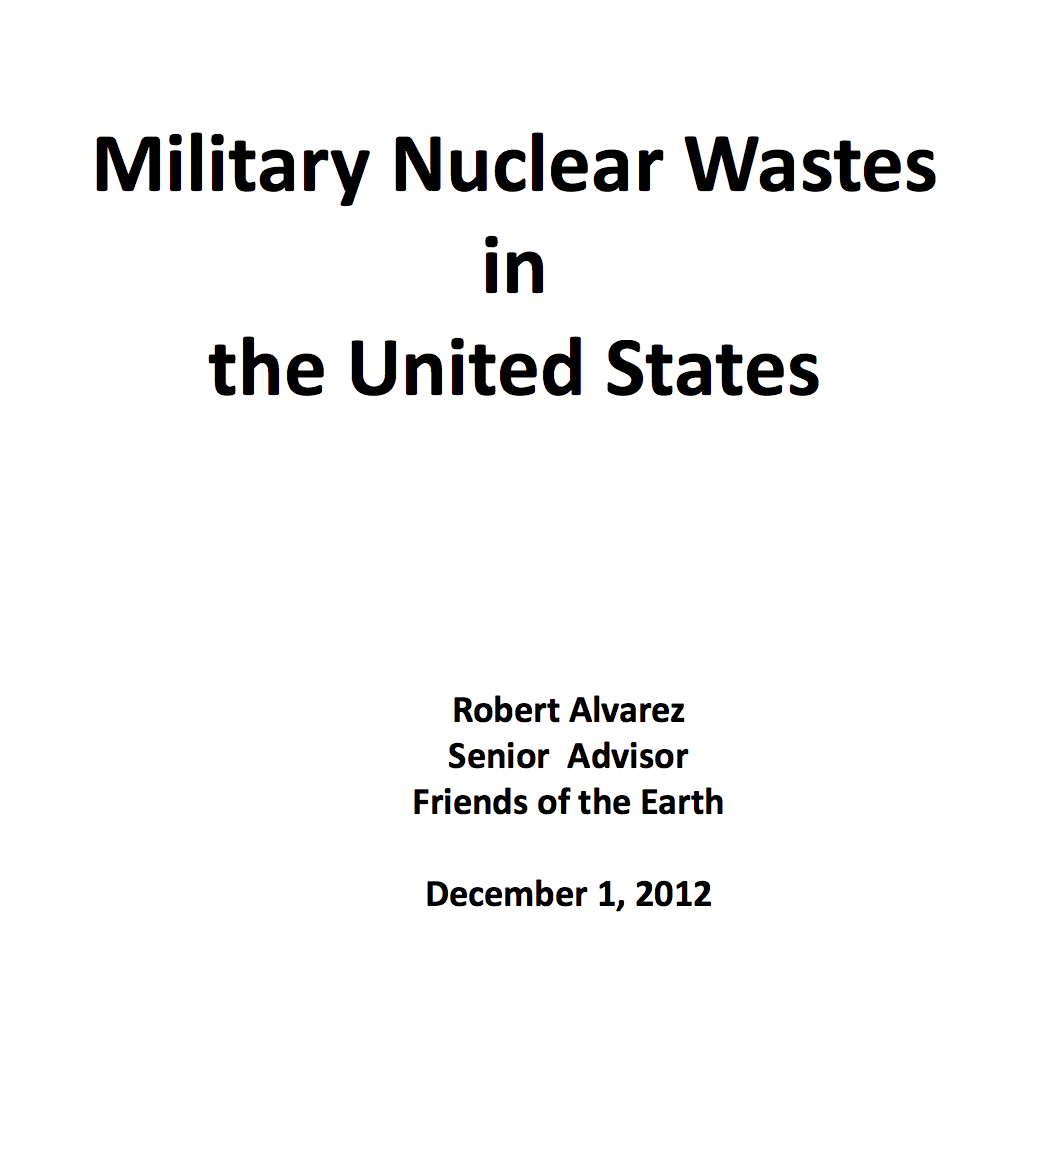 Military Nuclear Wastes in the United States